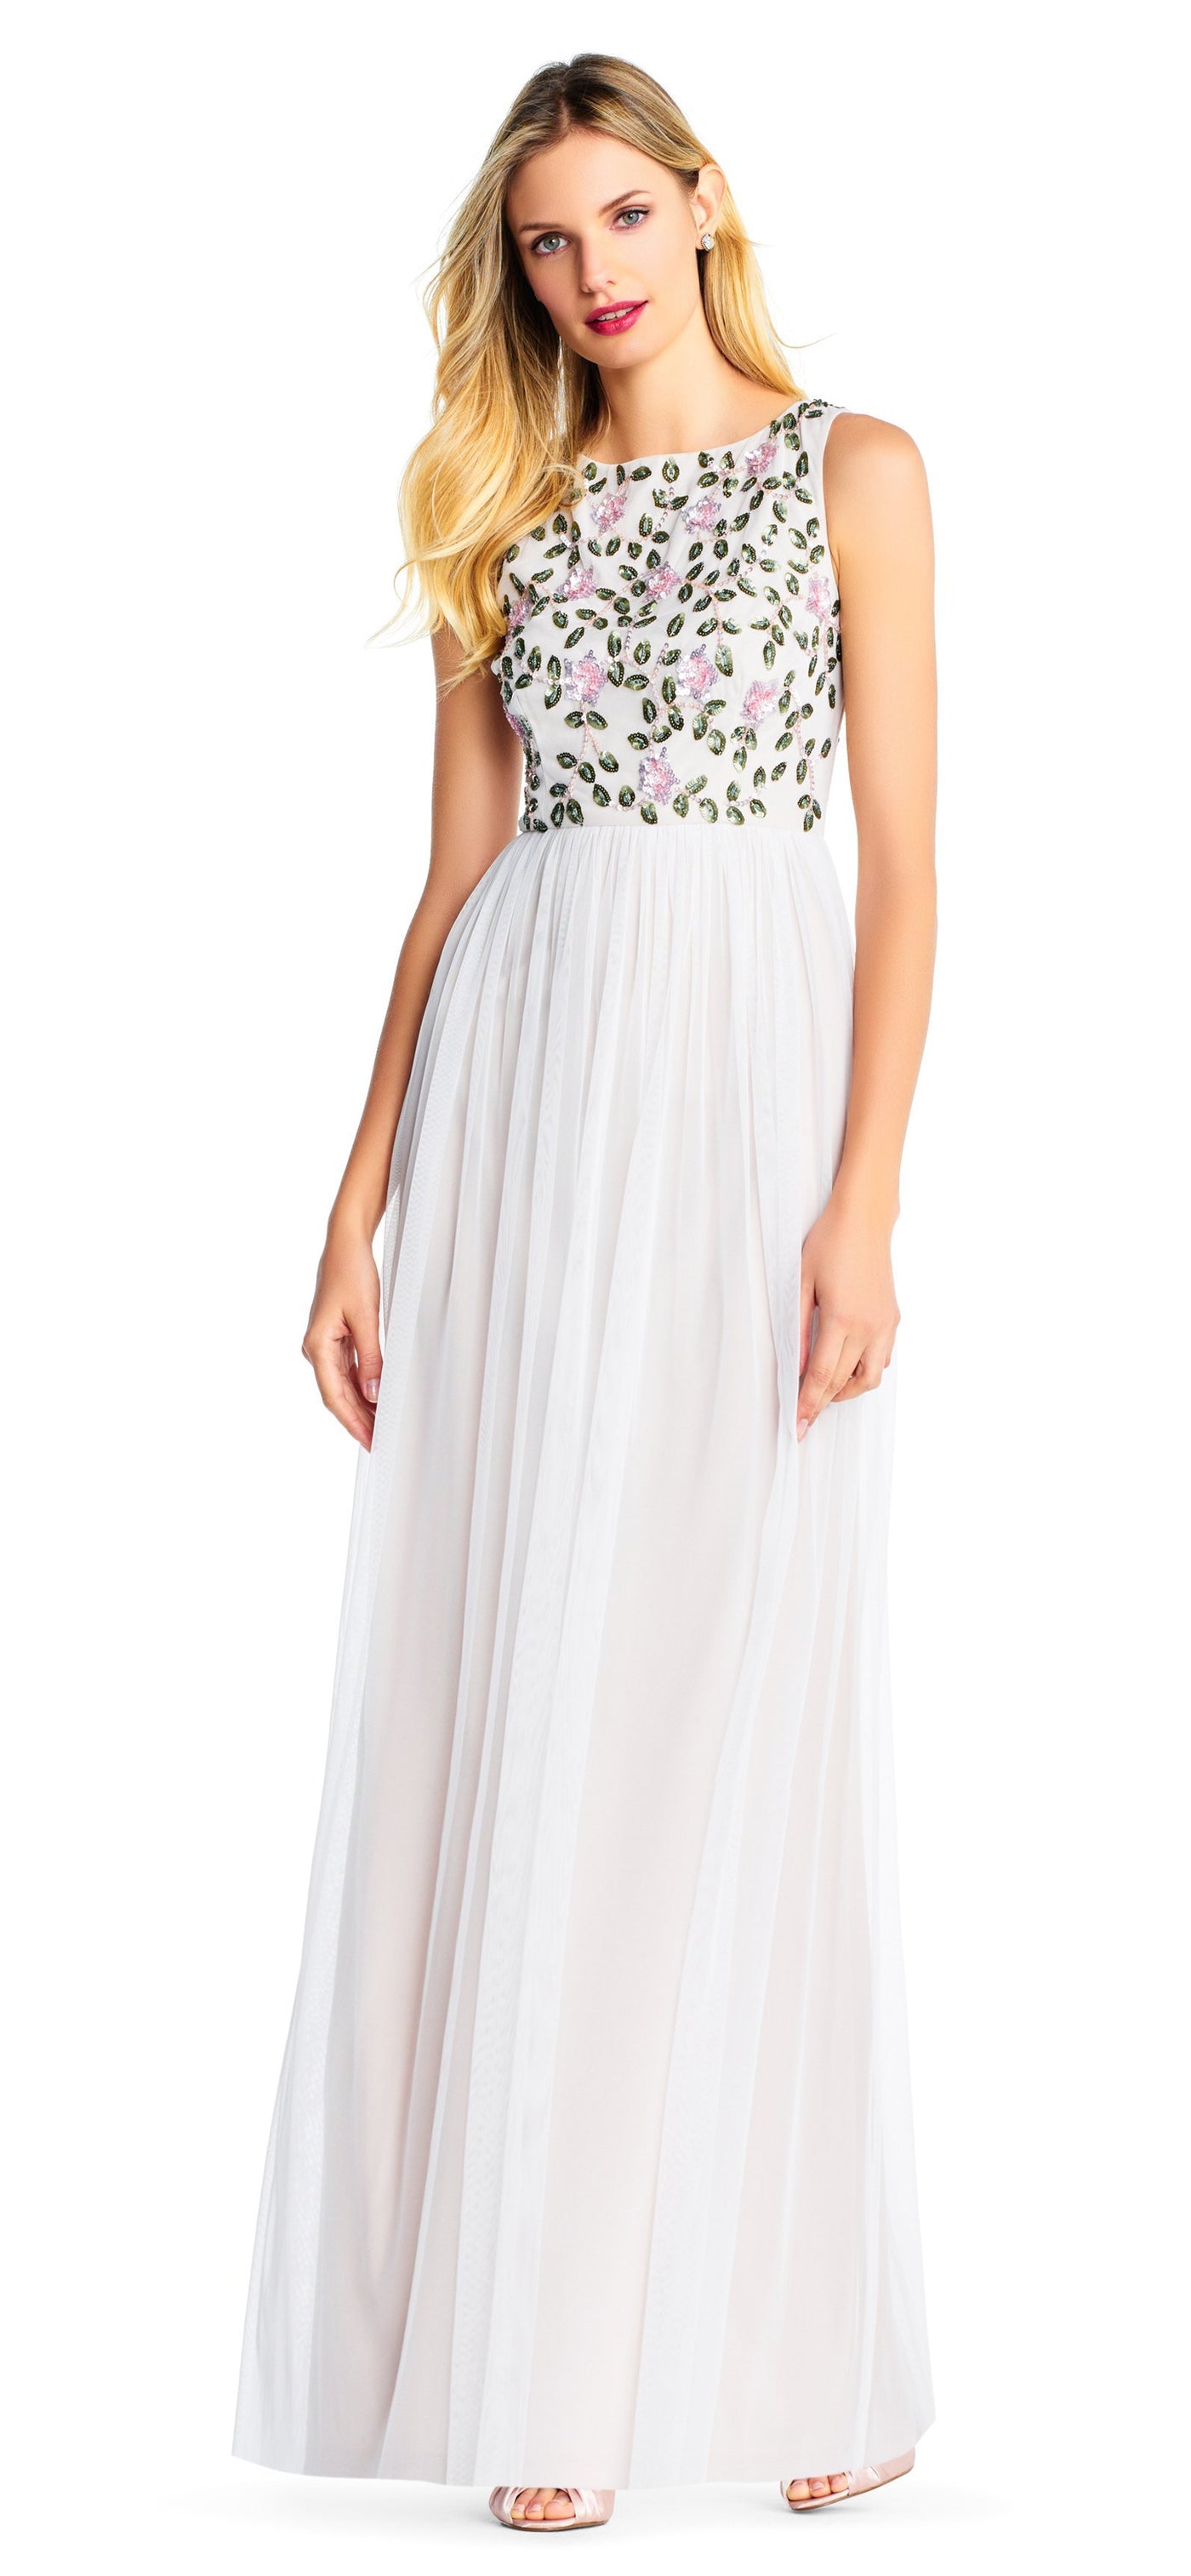 Adrianna Papell - AP1E203409 Bedazzled Bateau Mesh A-line Dress In White and Multi-Color